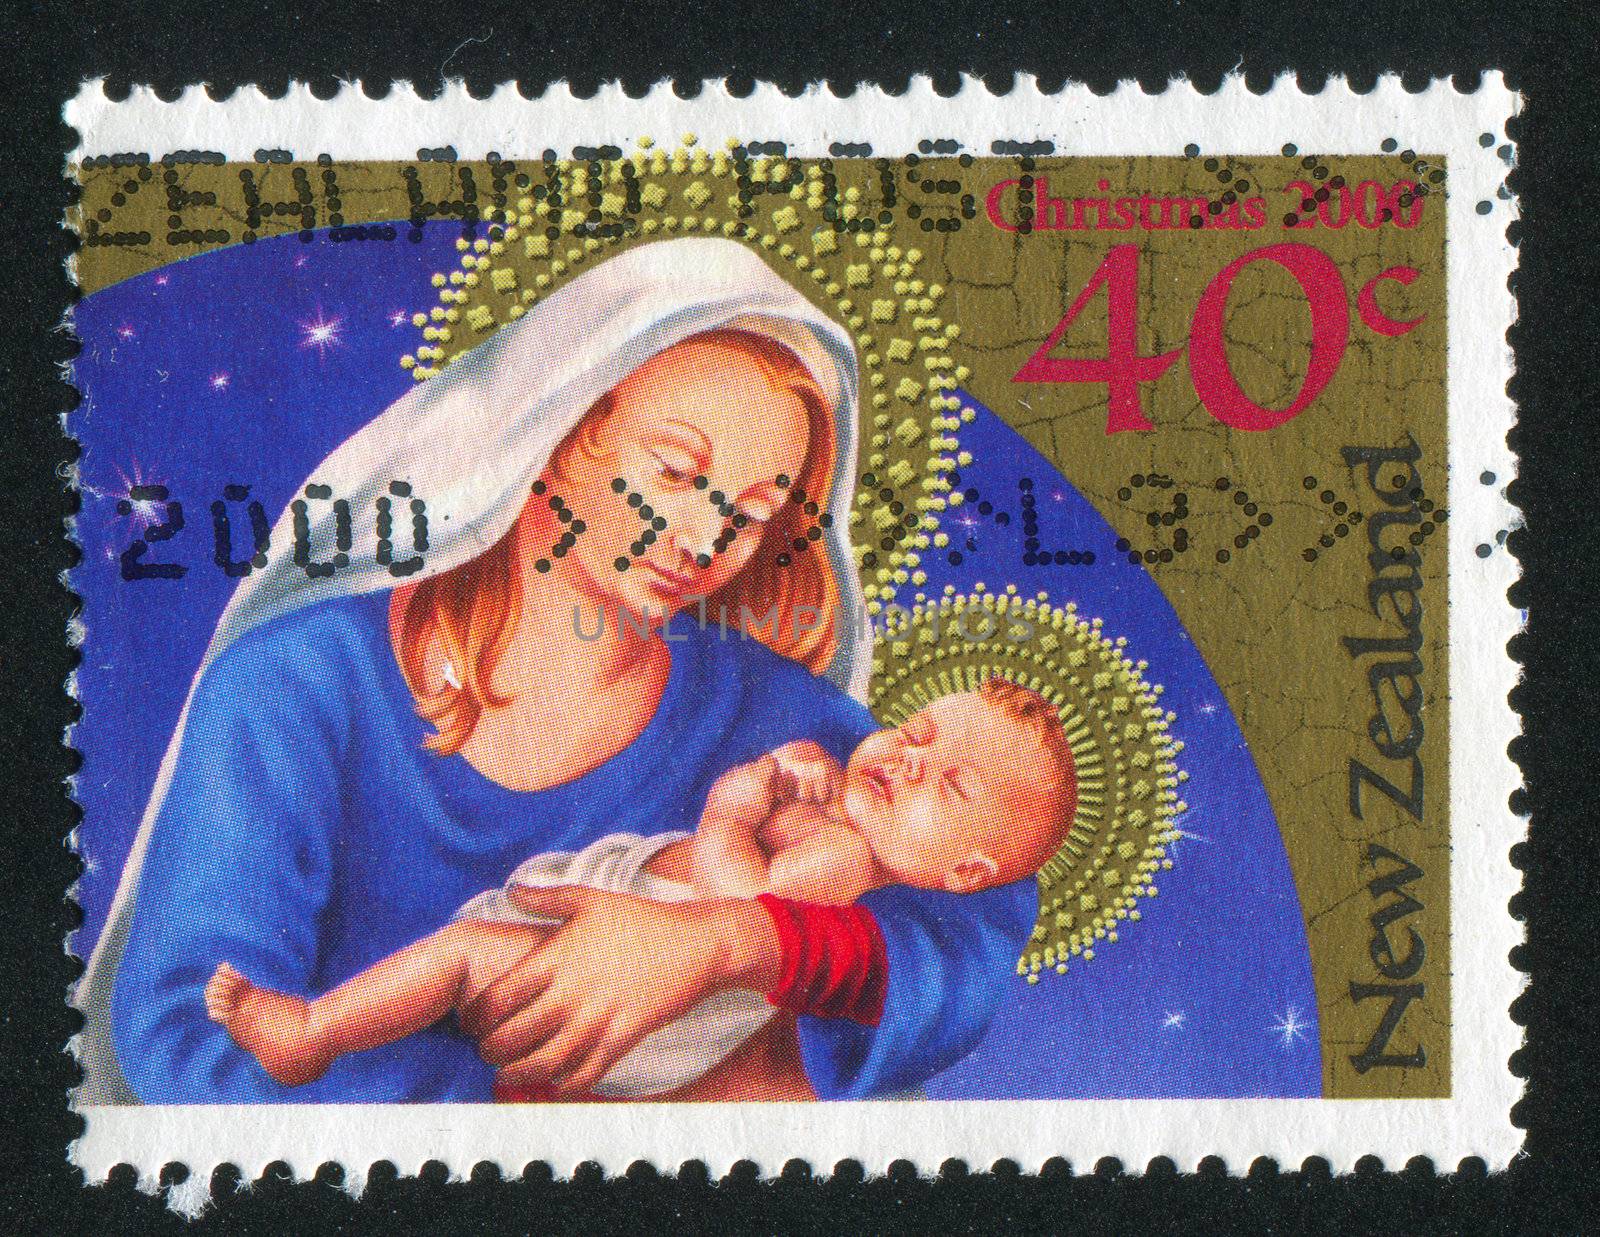 NEW ZEALAND - CIRCA 2000: stamp printed by New Zealand, shows Madonna and child, circa 2000